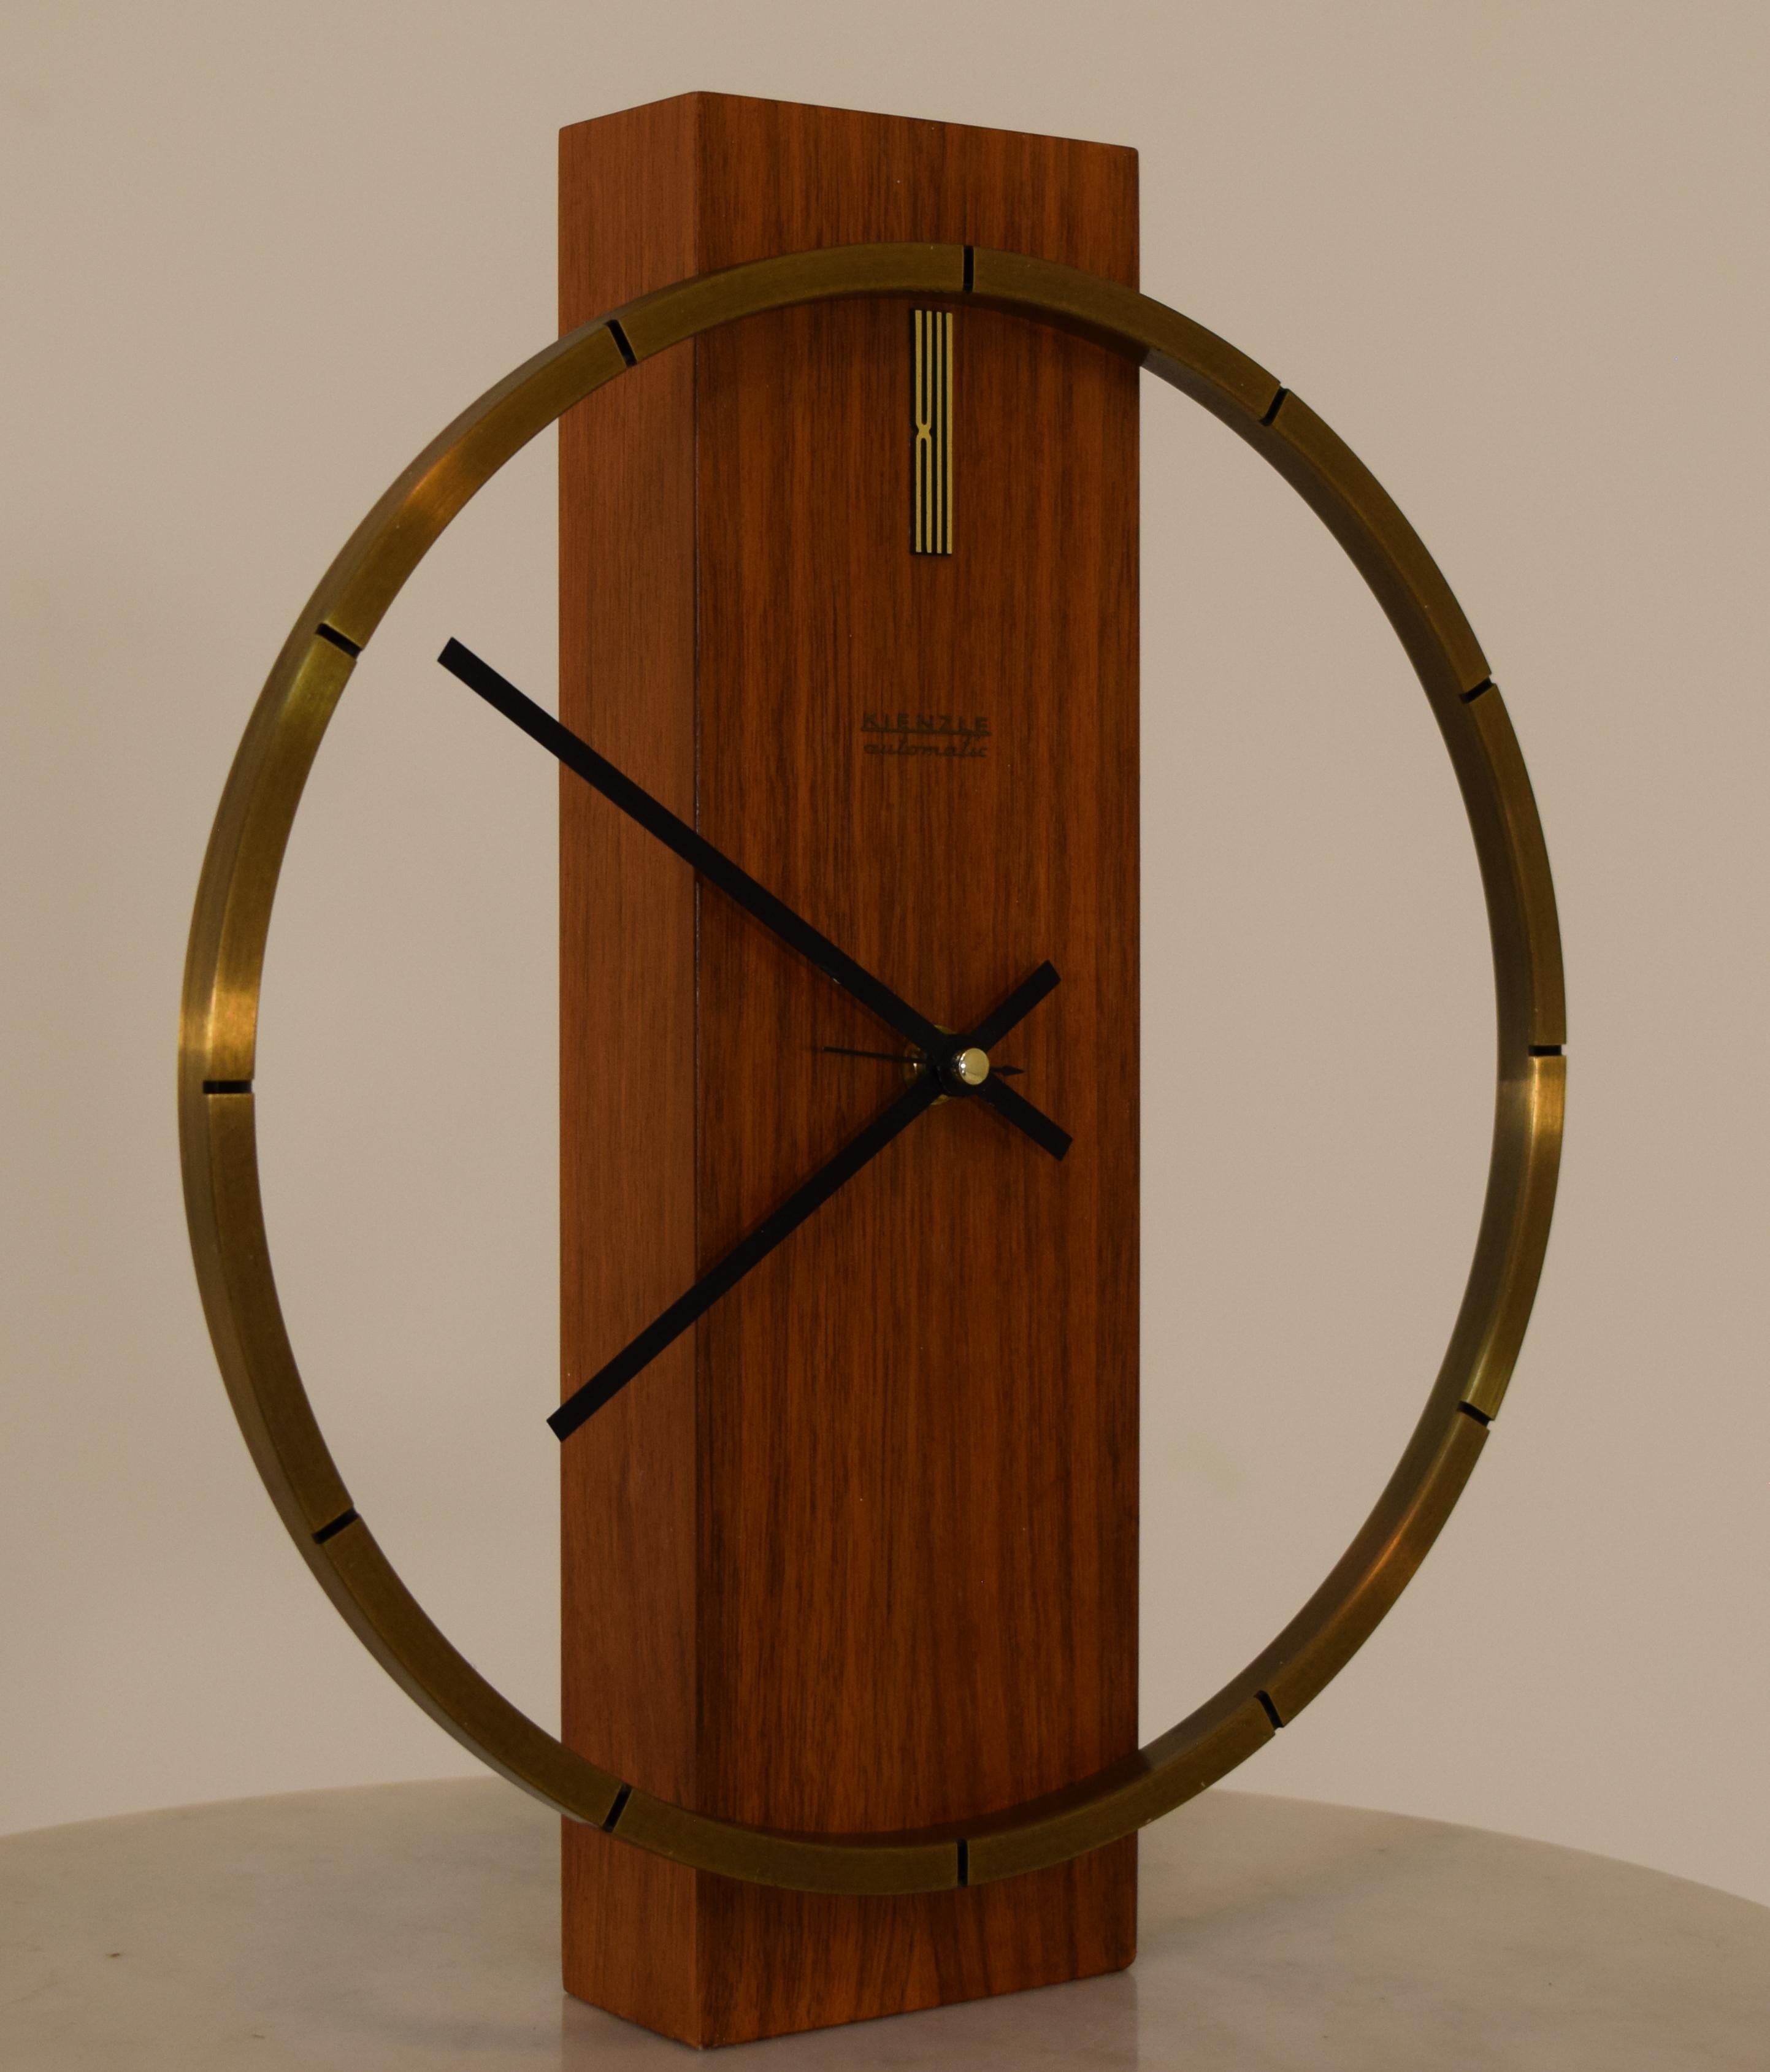 Minimalist design, produced in Germany by Kienzle Uhren, this clock may be mounted to a wall or sit upon a mantle. This model differs from others seen from the era in the omitted 